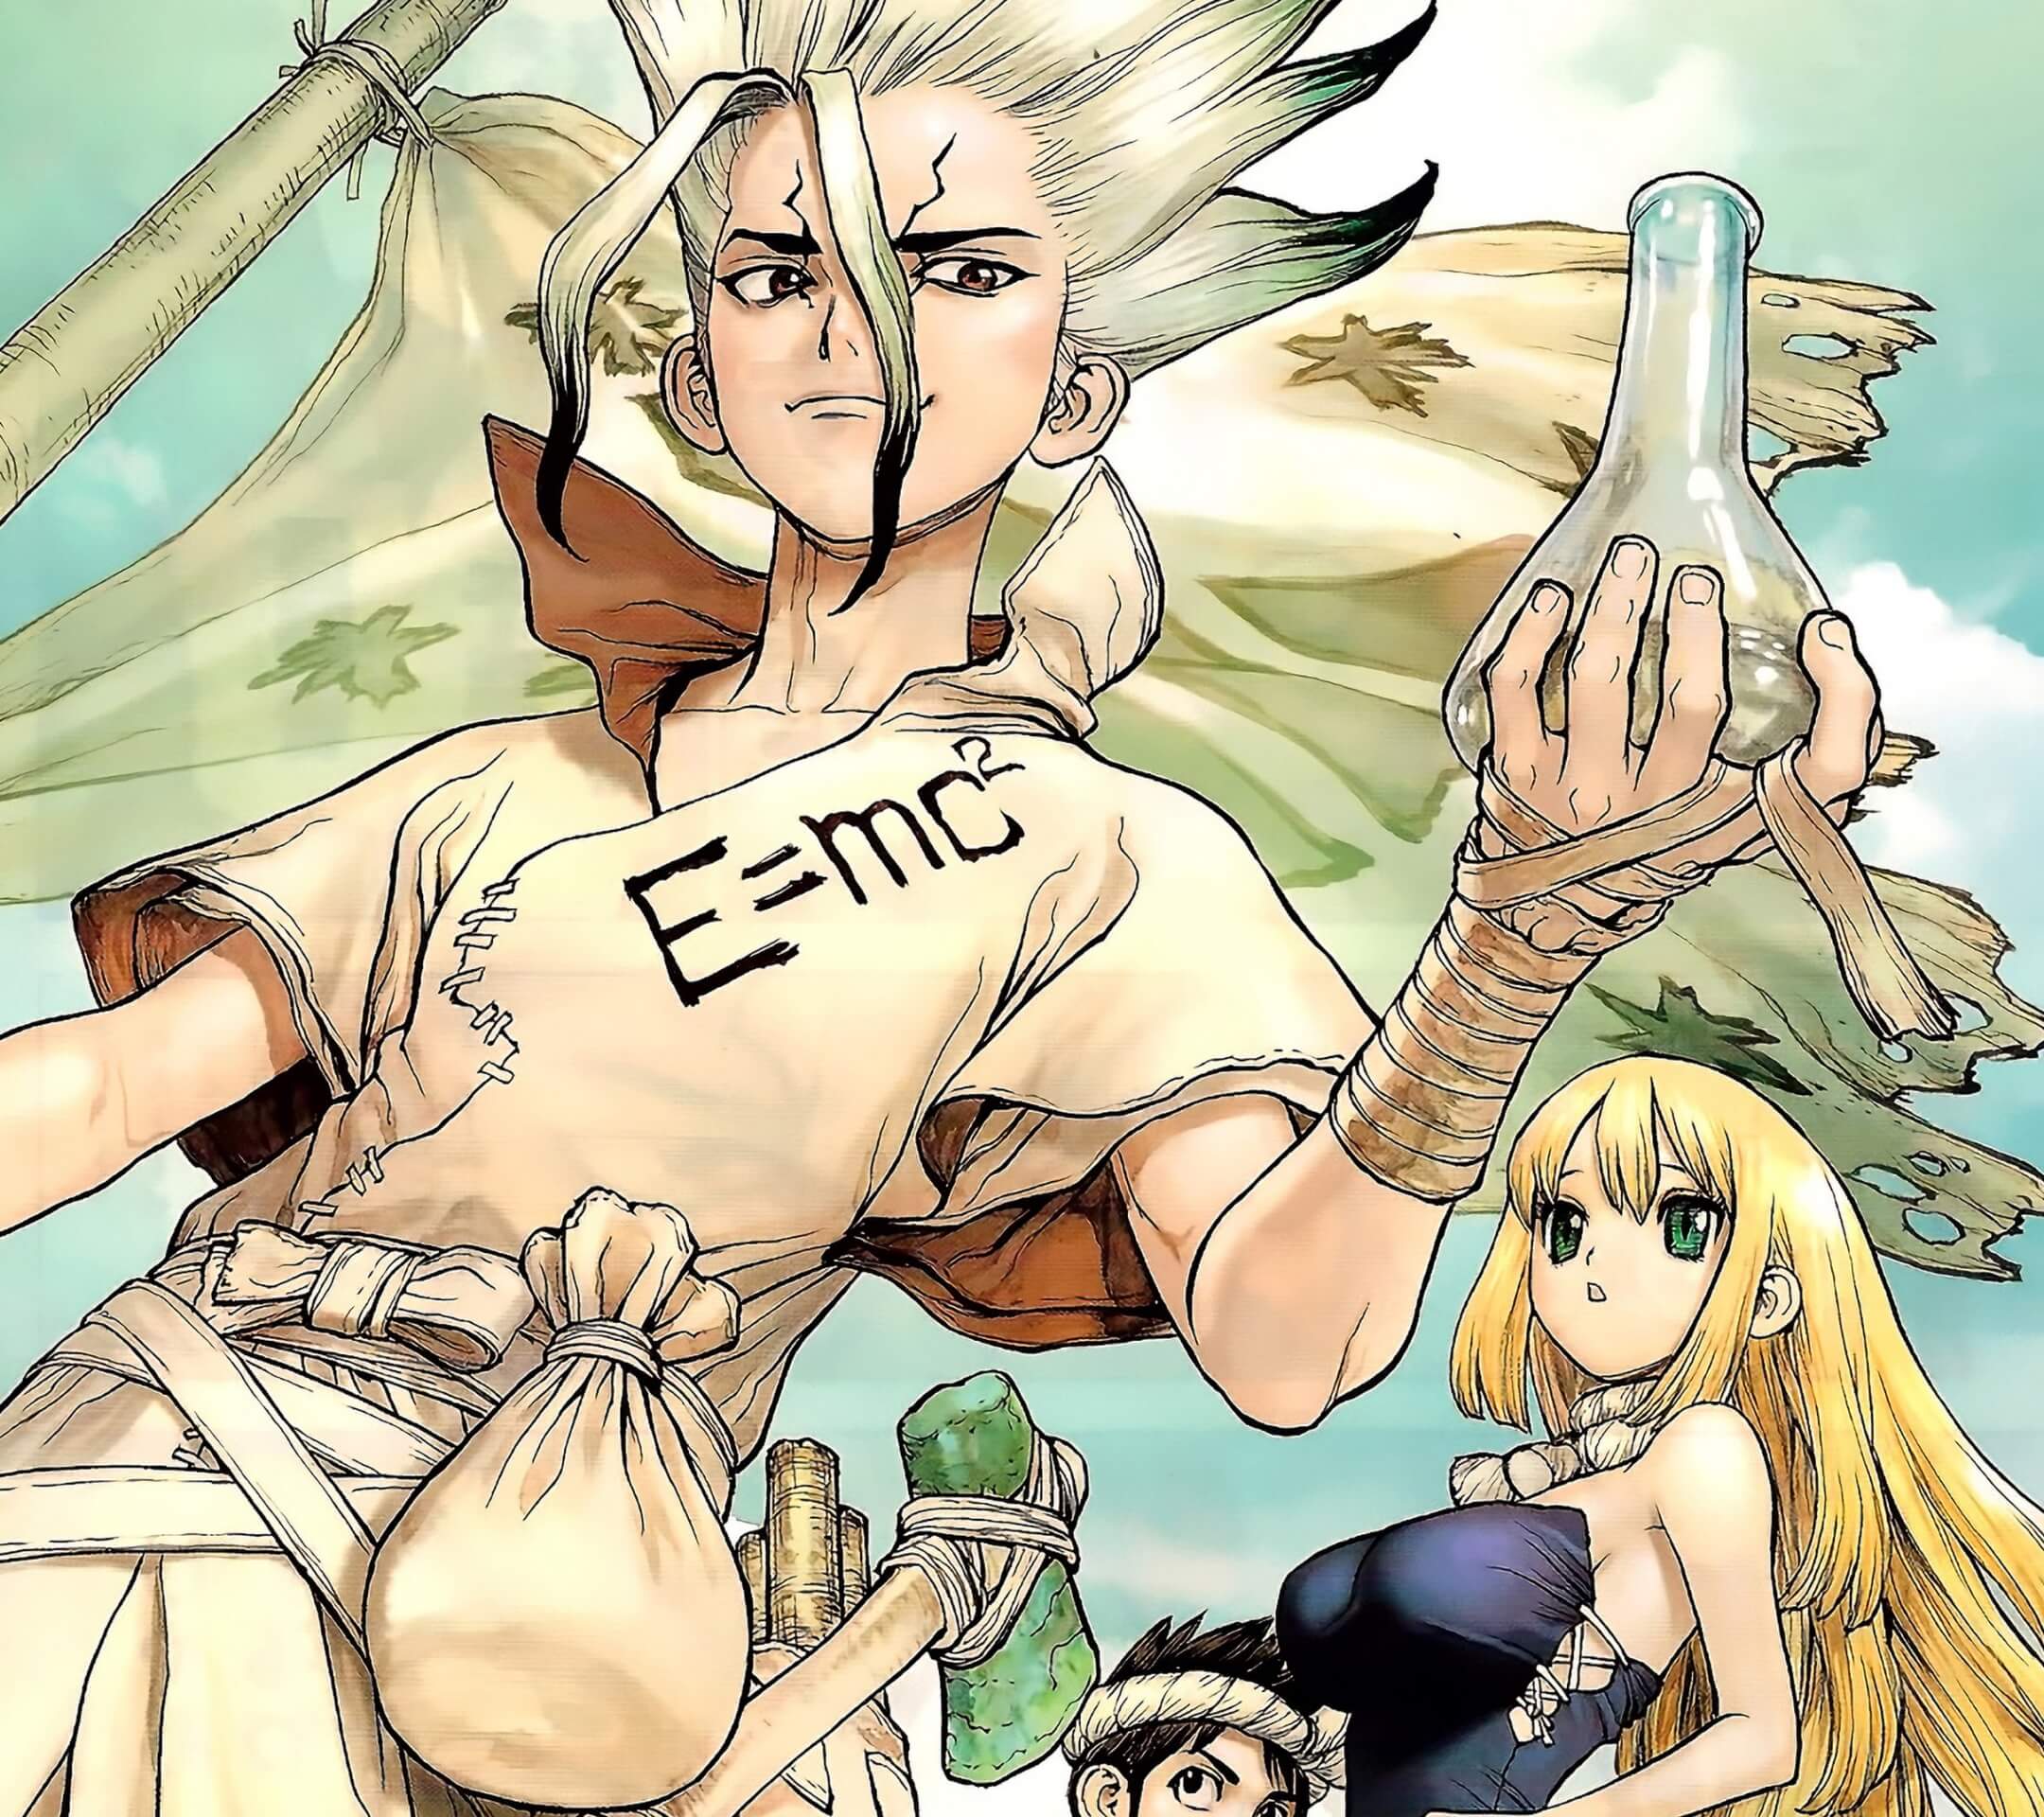 Dr. Stone wallpaper for iPhone and android smartphones